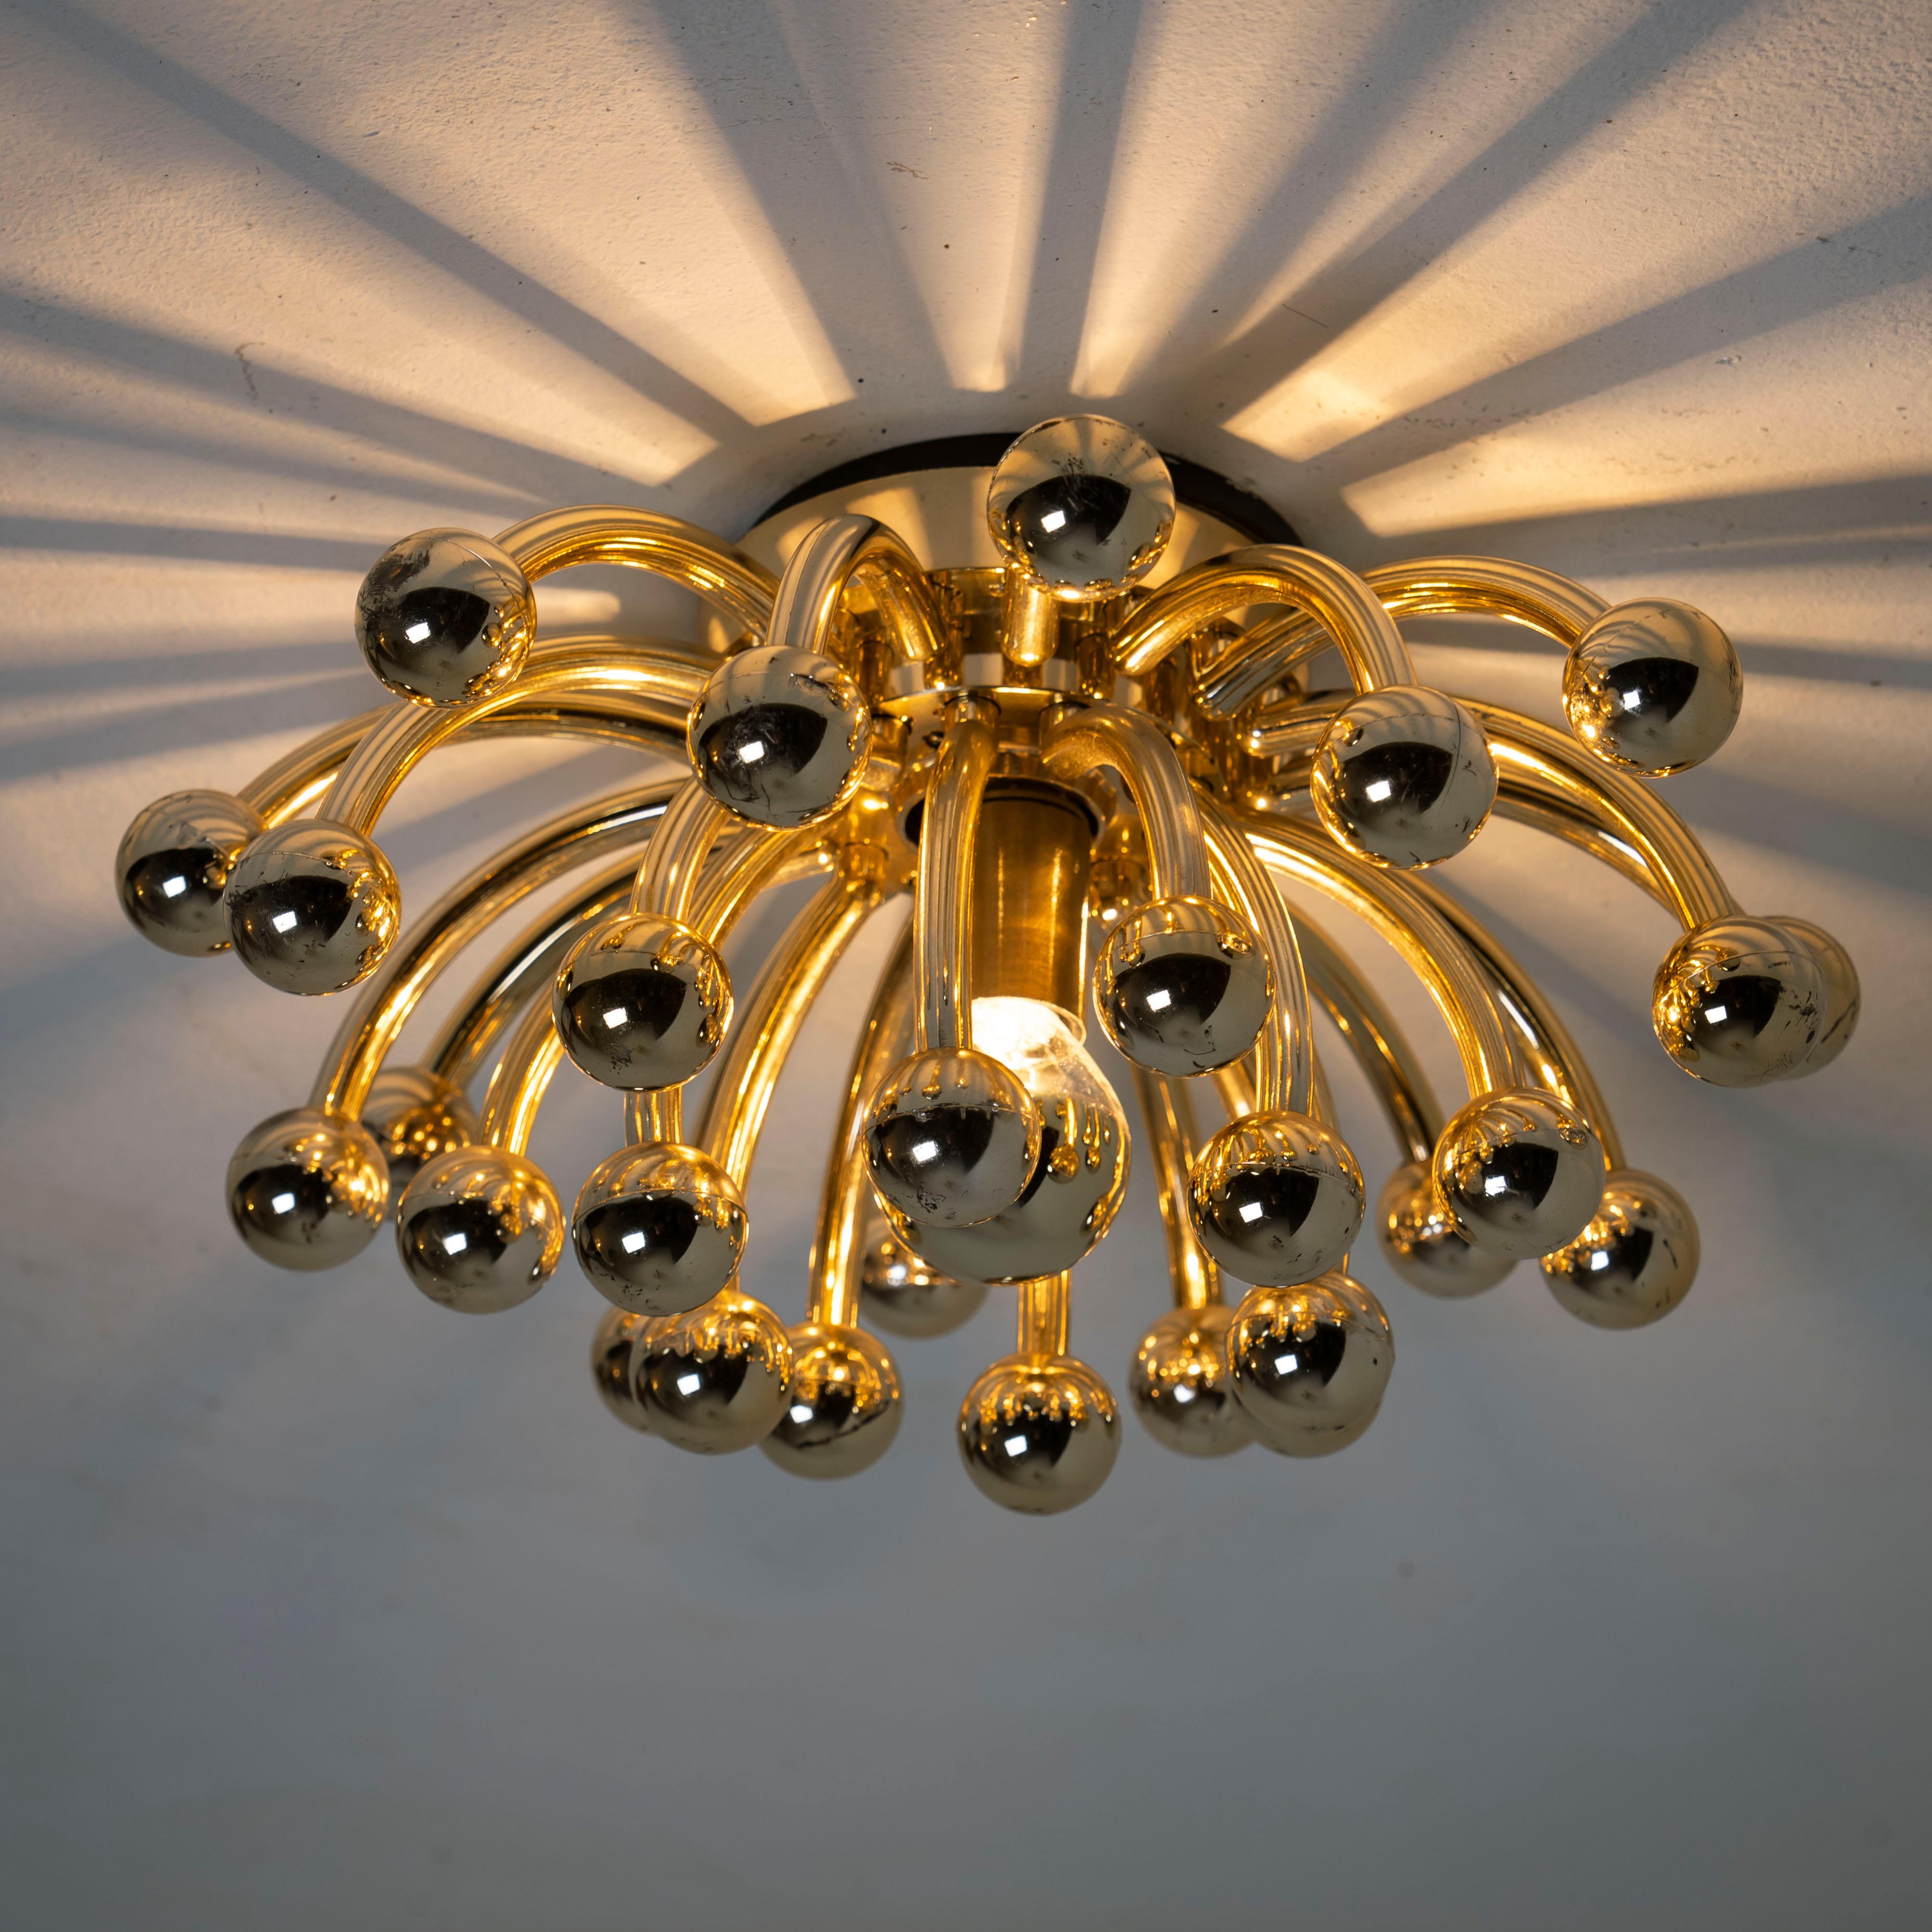 Pair of Valenti Luce Pistillino Wall Lights, Italy, 1970 For Sale 2